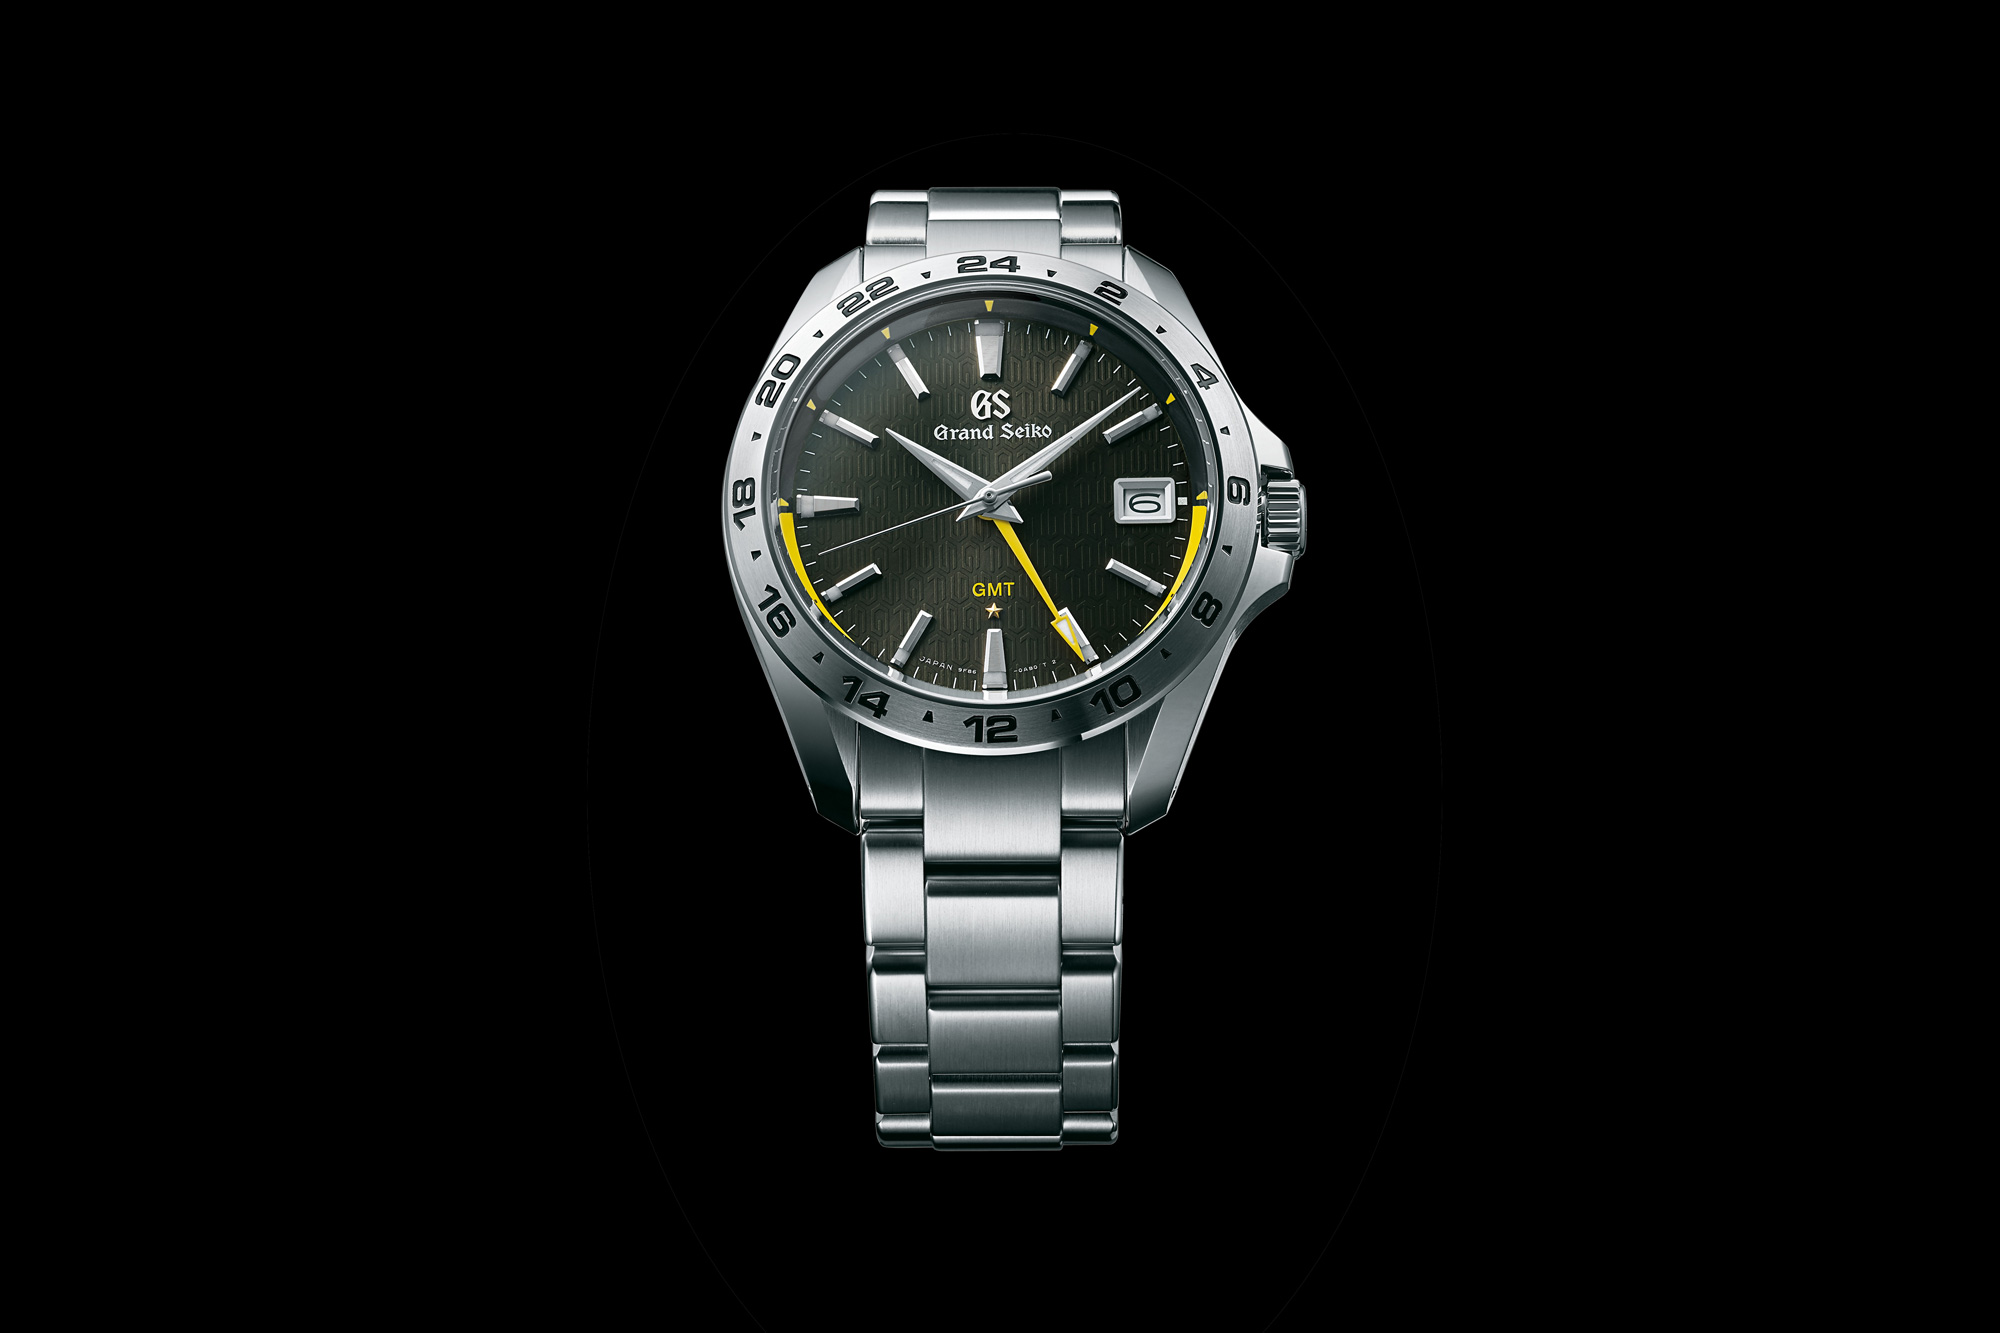 Grand Seiko SBGN001, stainless steel wristwatch with yellow accents.